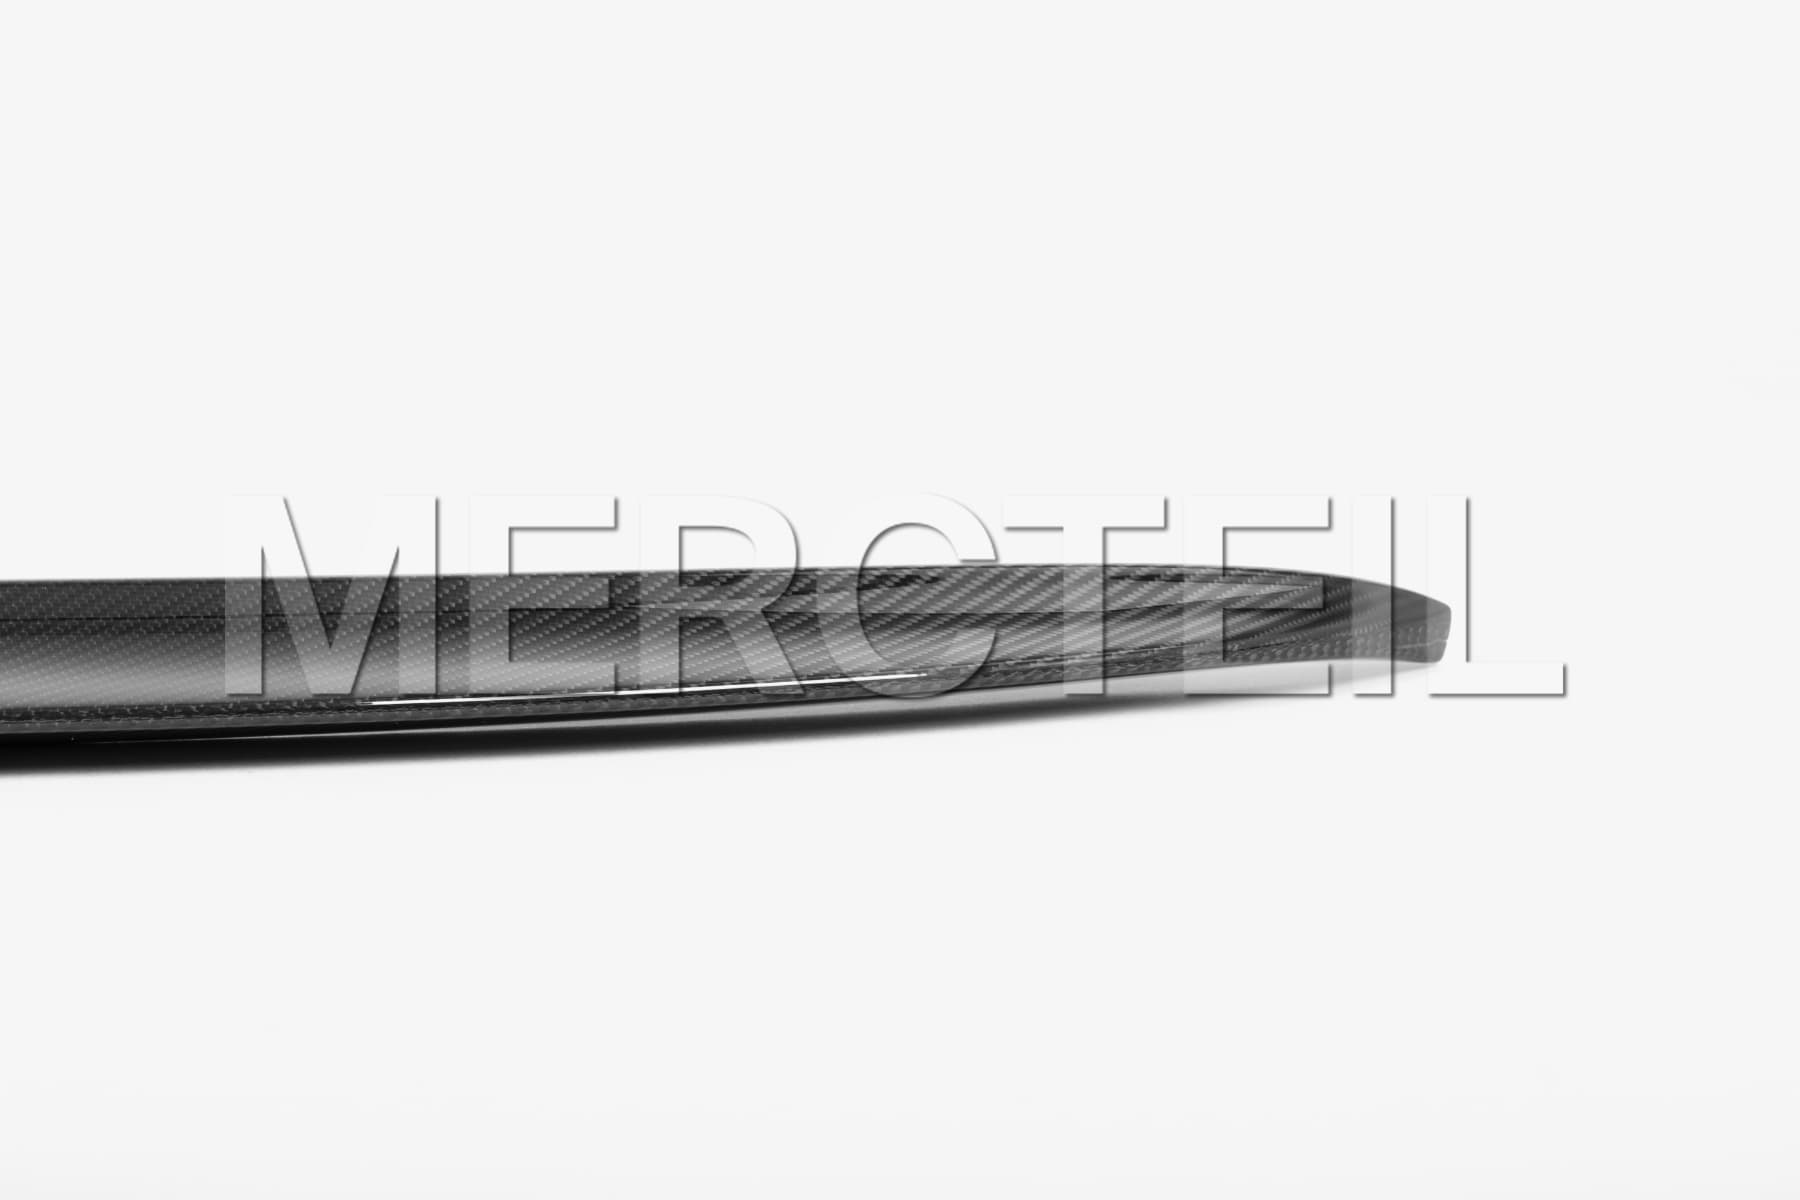 GLC-Class AMG Carbon Spoiler 253 Genuine Mercedes-AMG (Part number: A2537901800)